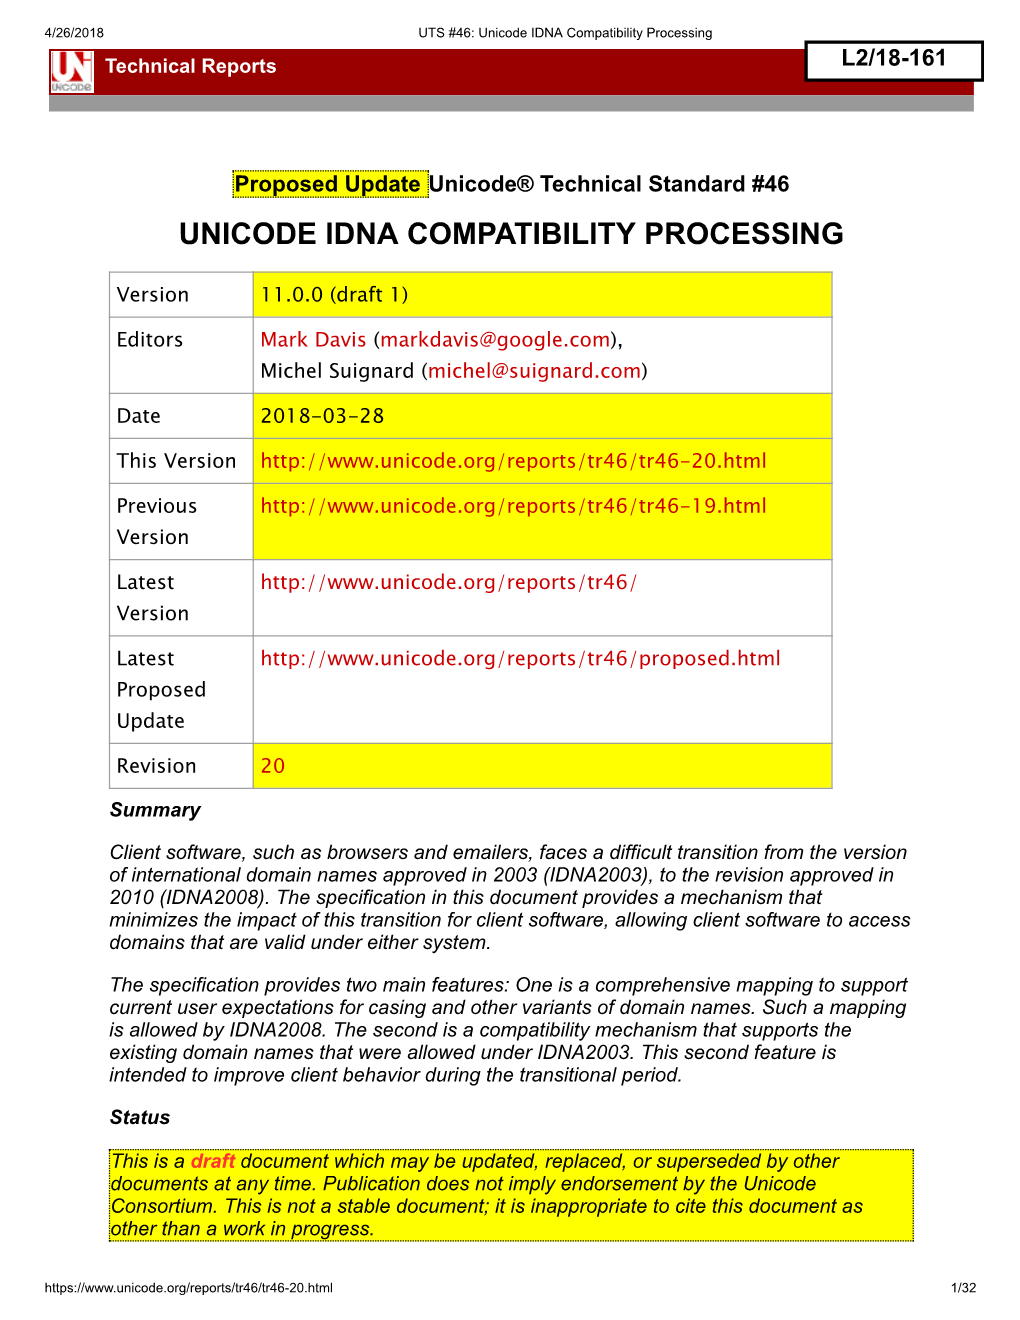 Unicode IDNA Compatibility Processing Technical Reports